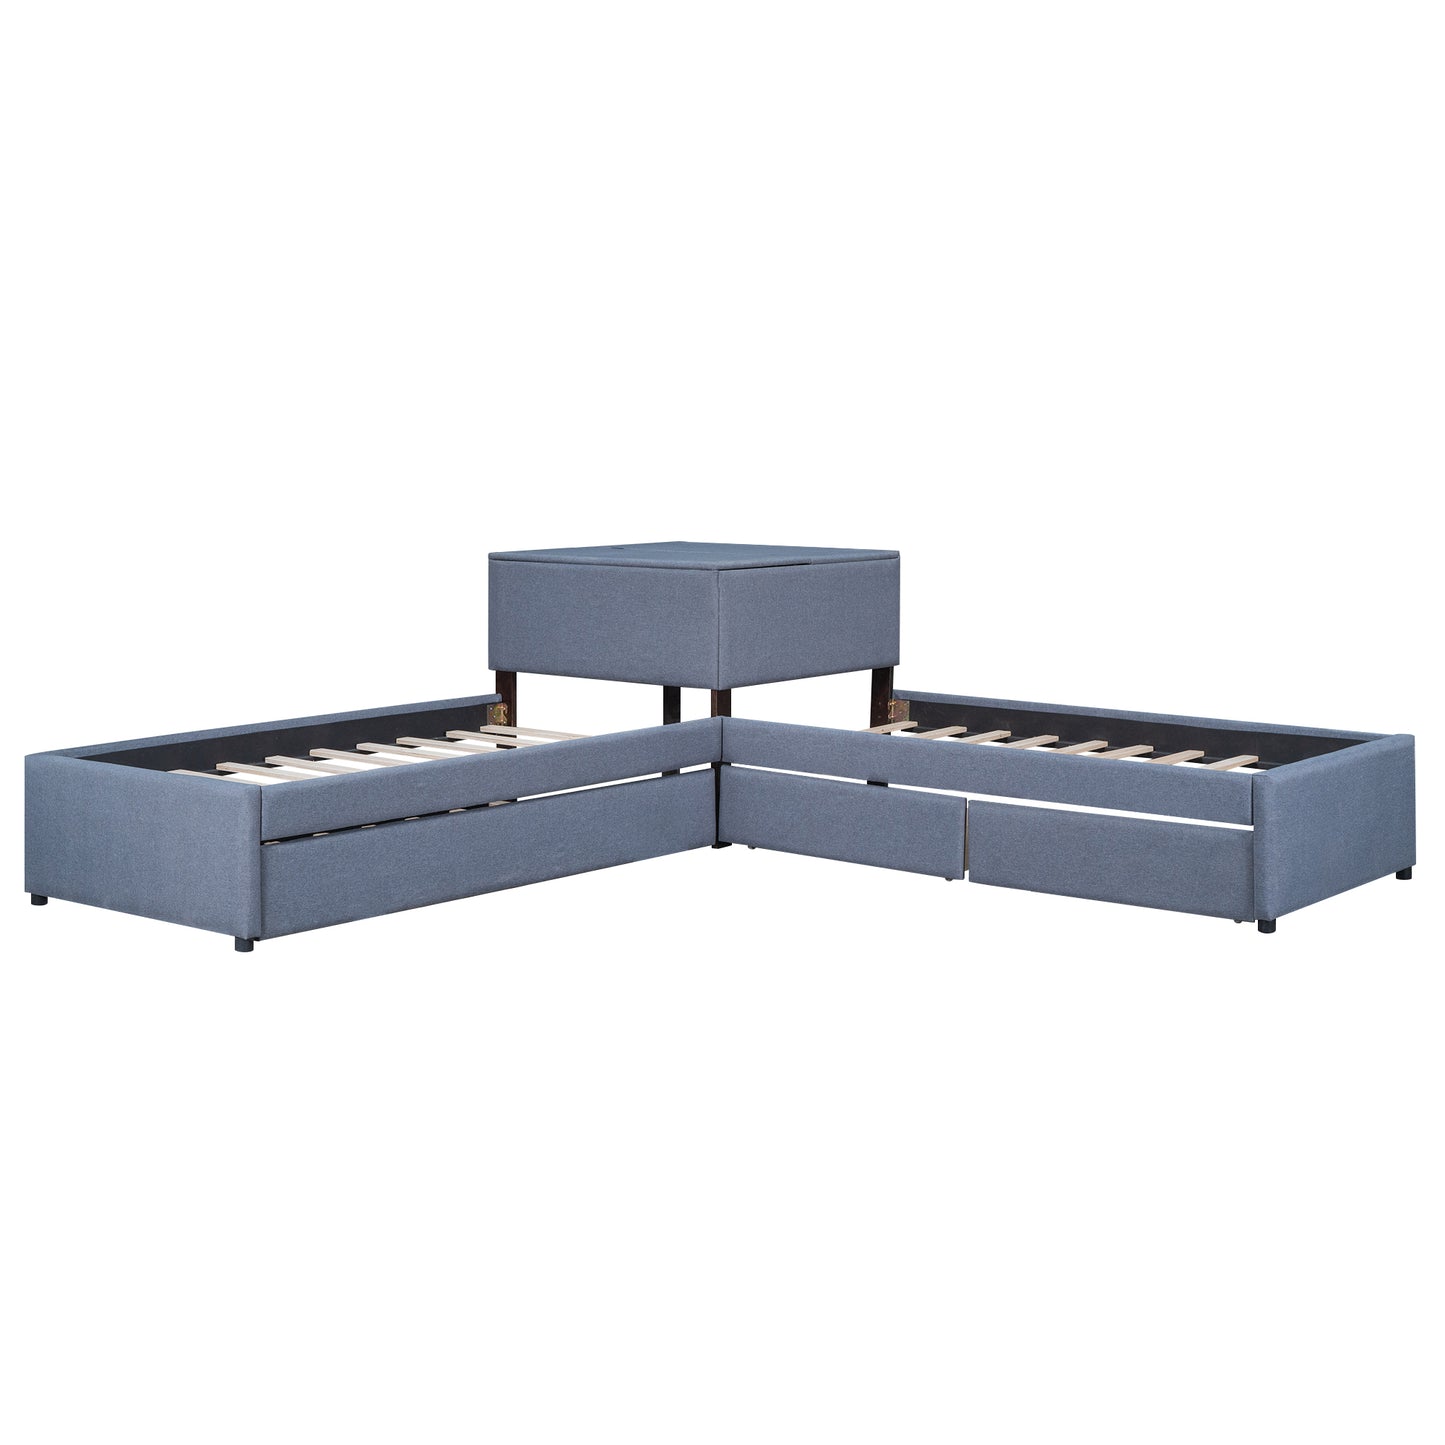 L-shaped Upholstered Platform Bed with Trundle and Two Drawers Linked with built-in Desk,Twin,Gray